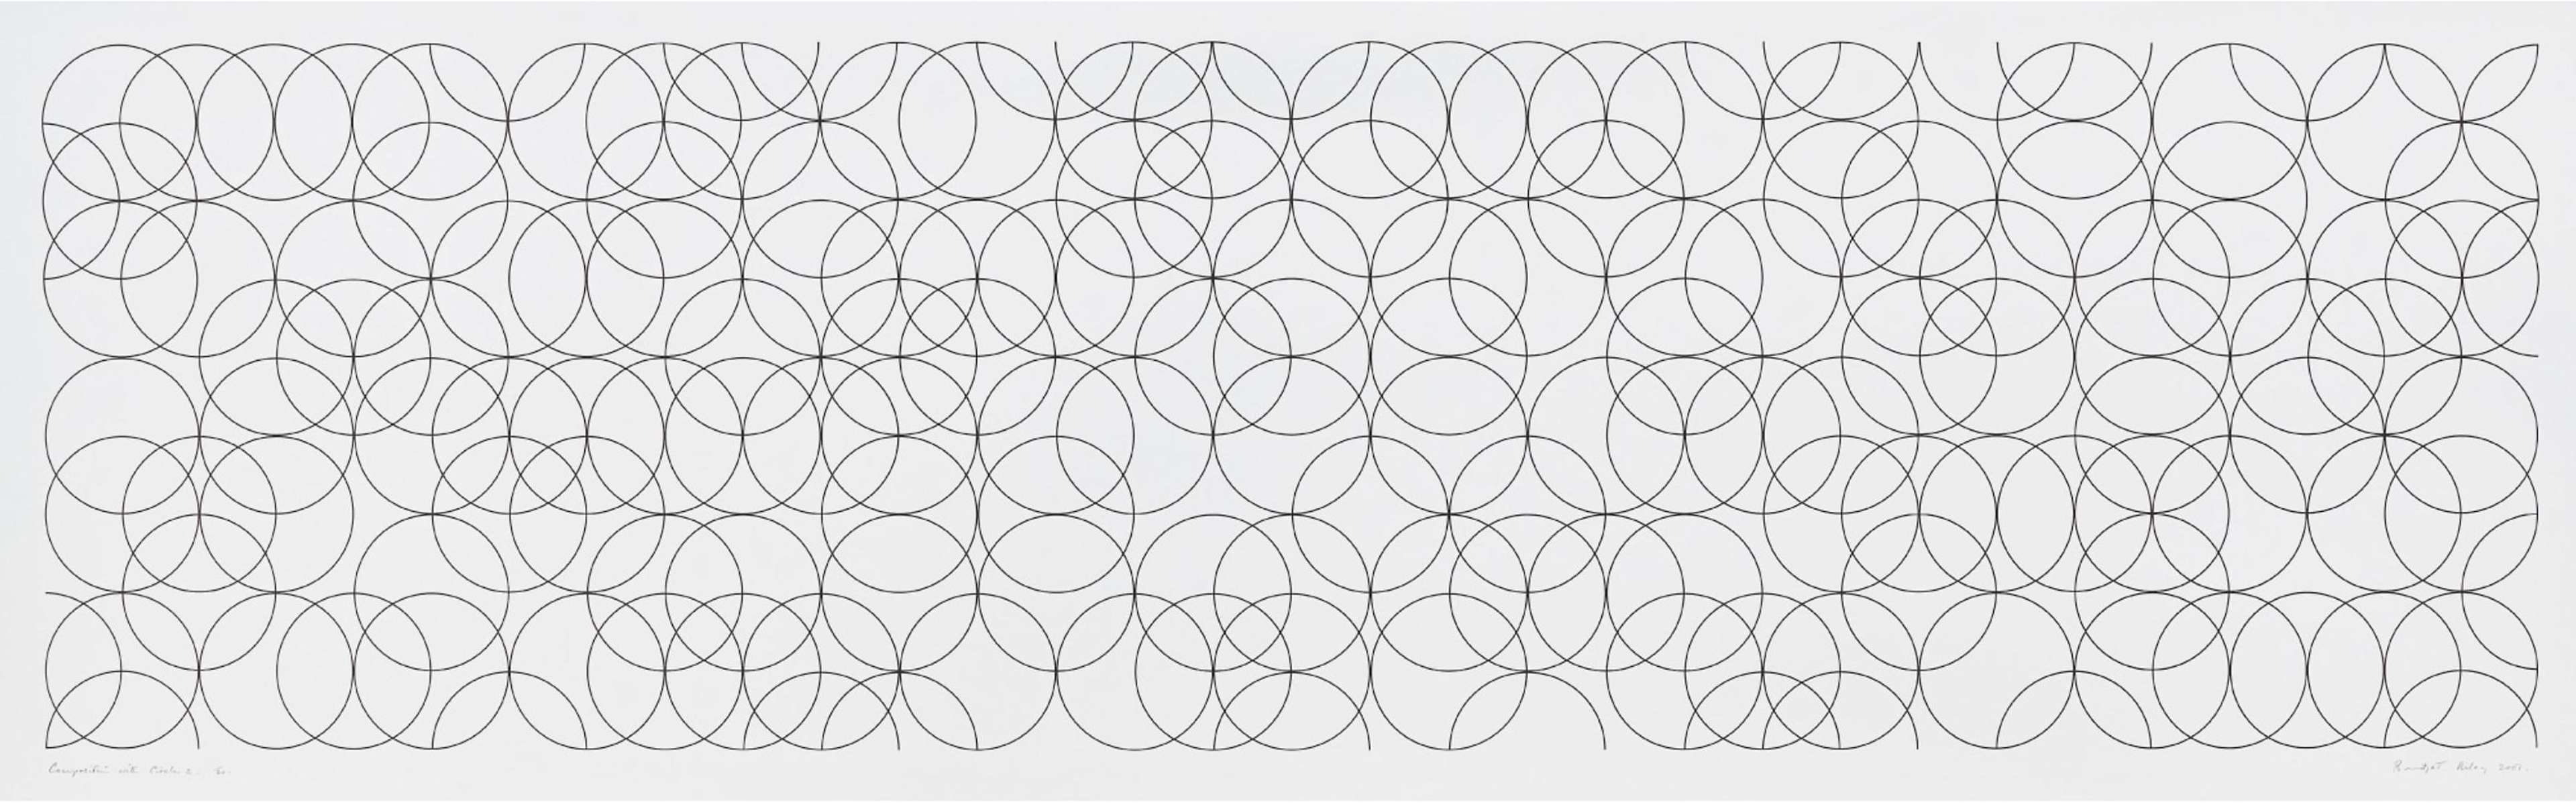 Composition With Circles 2 - Signed Print by Bridget Riley 2001 - MyArtBroker